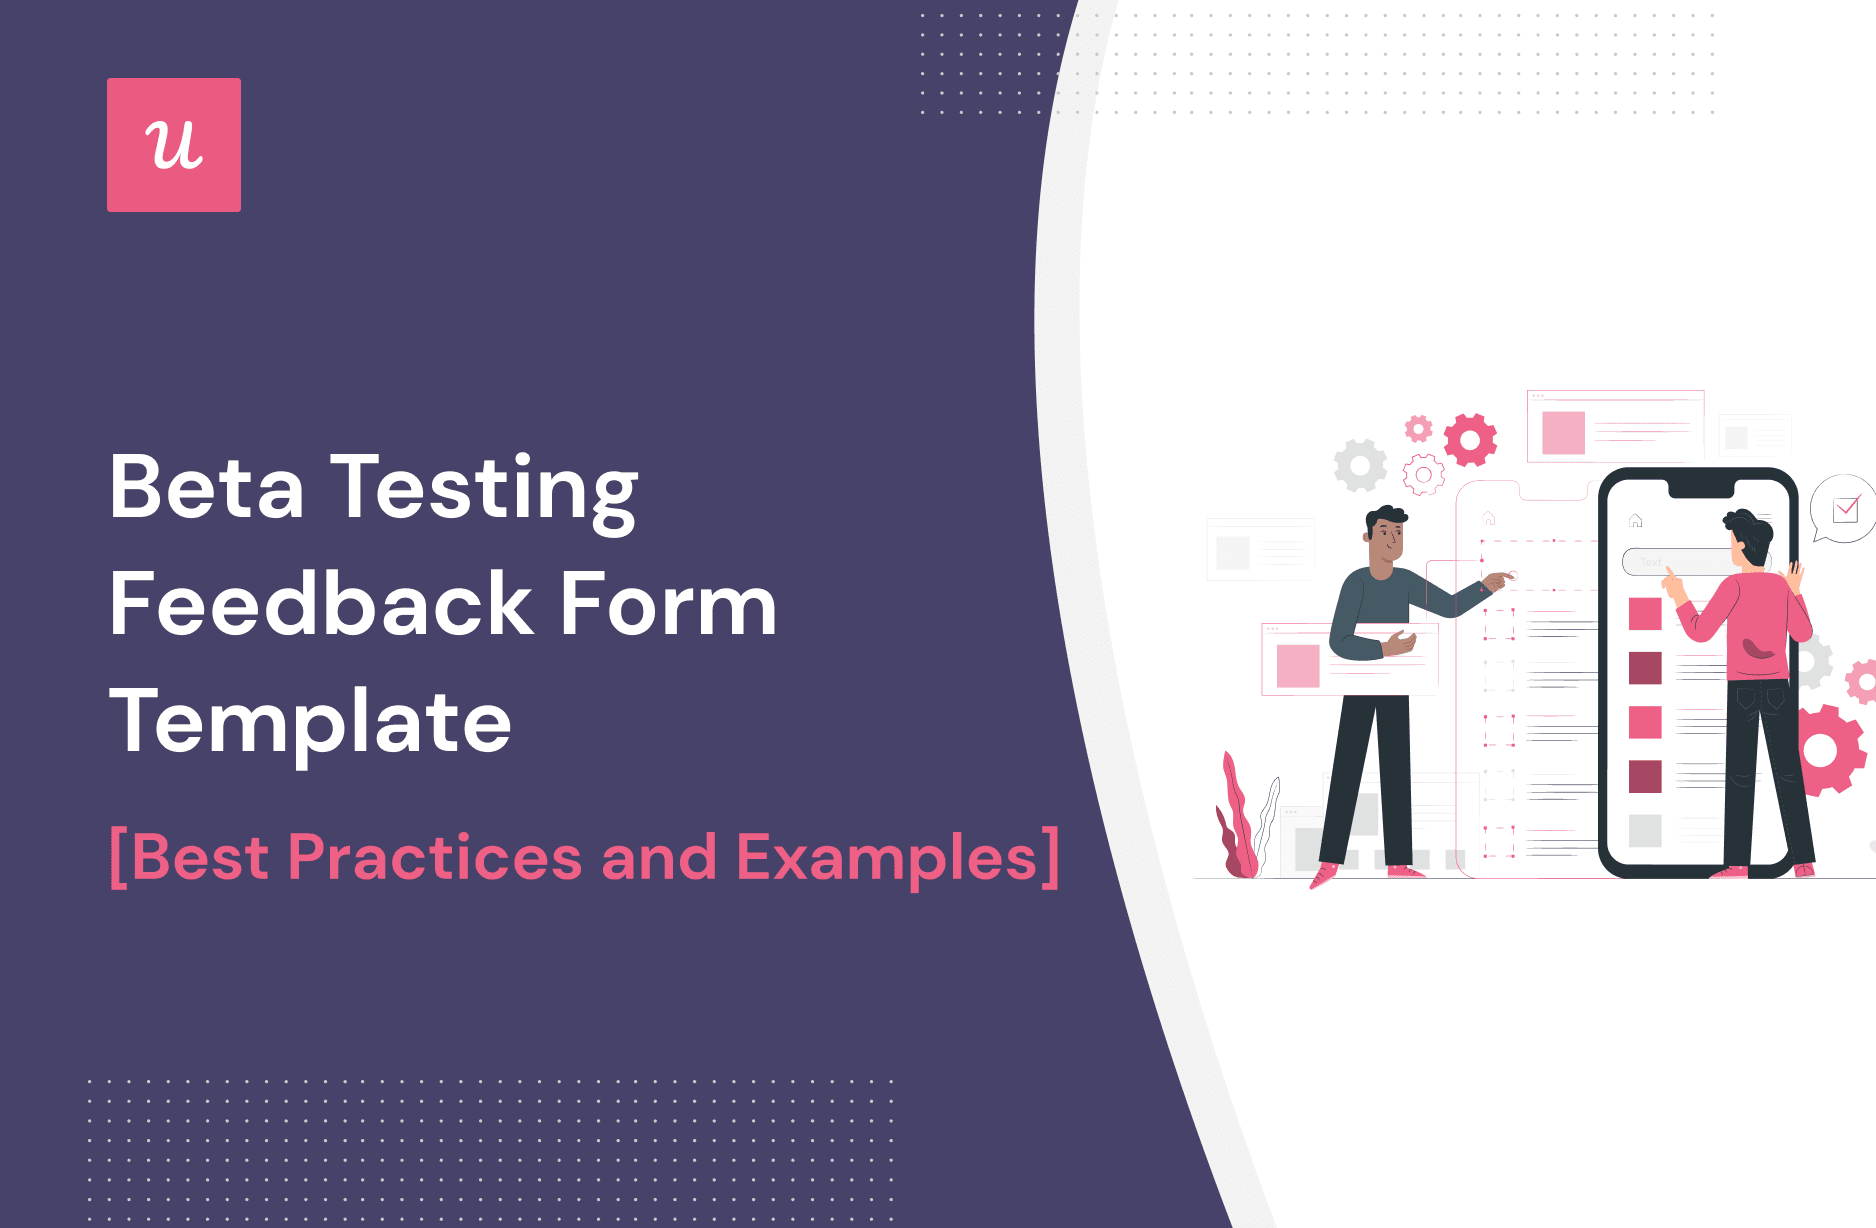 Beta Testing Feedback Form Template: Best Practices and Examples cover